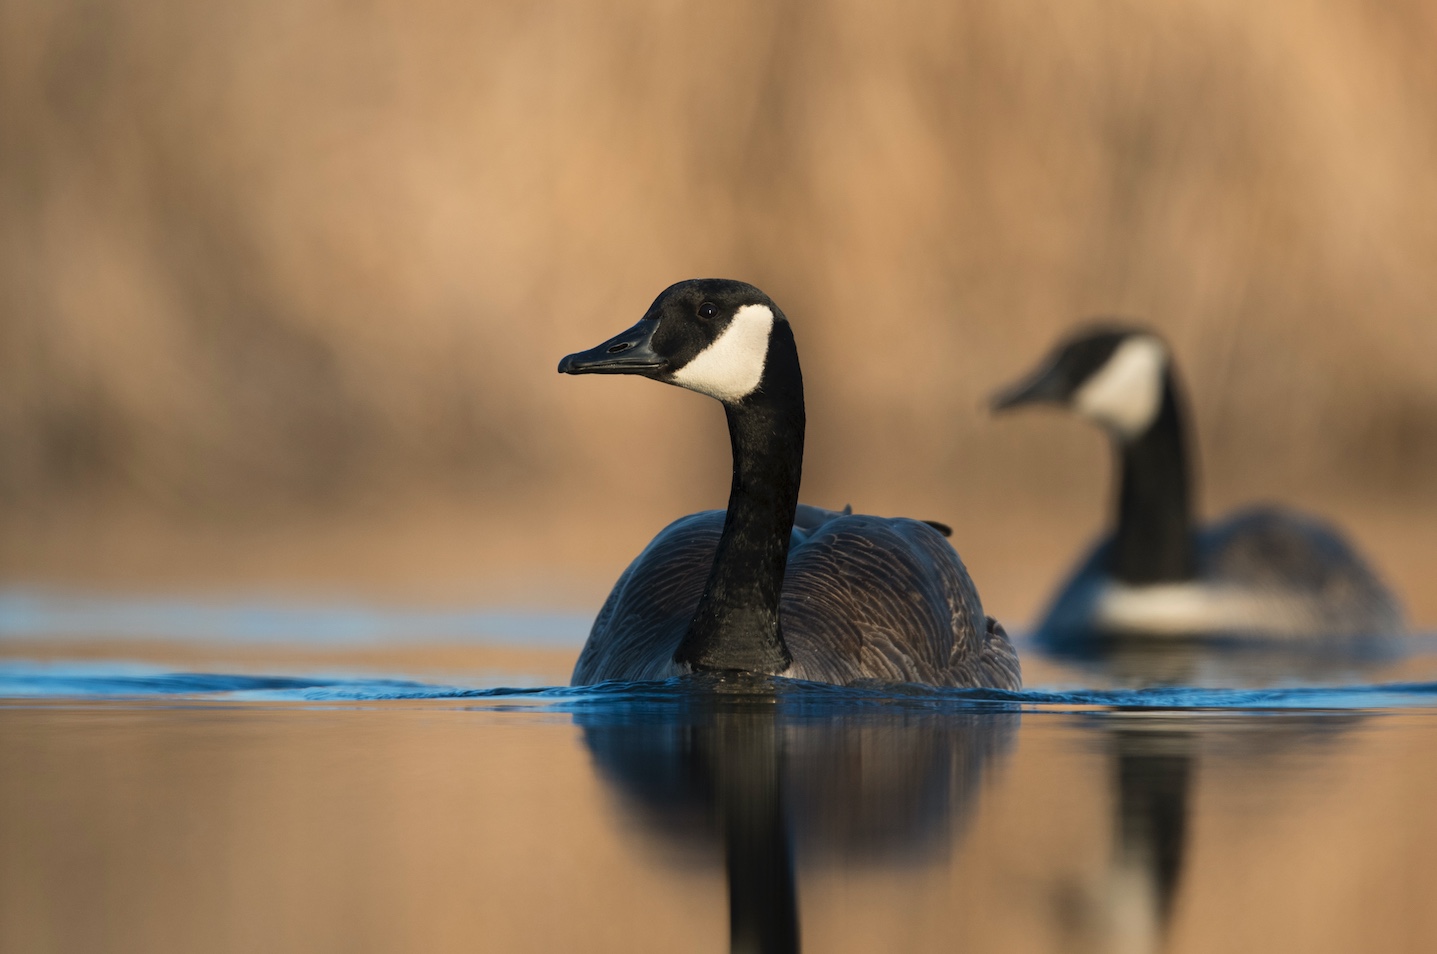 Pair of Canada geese swimming on a lake.